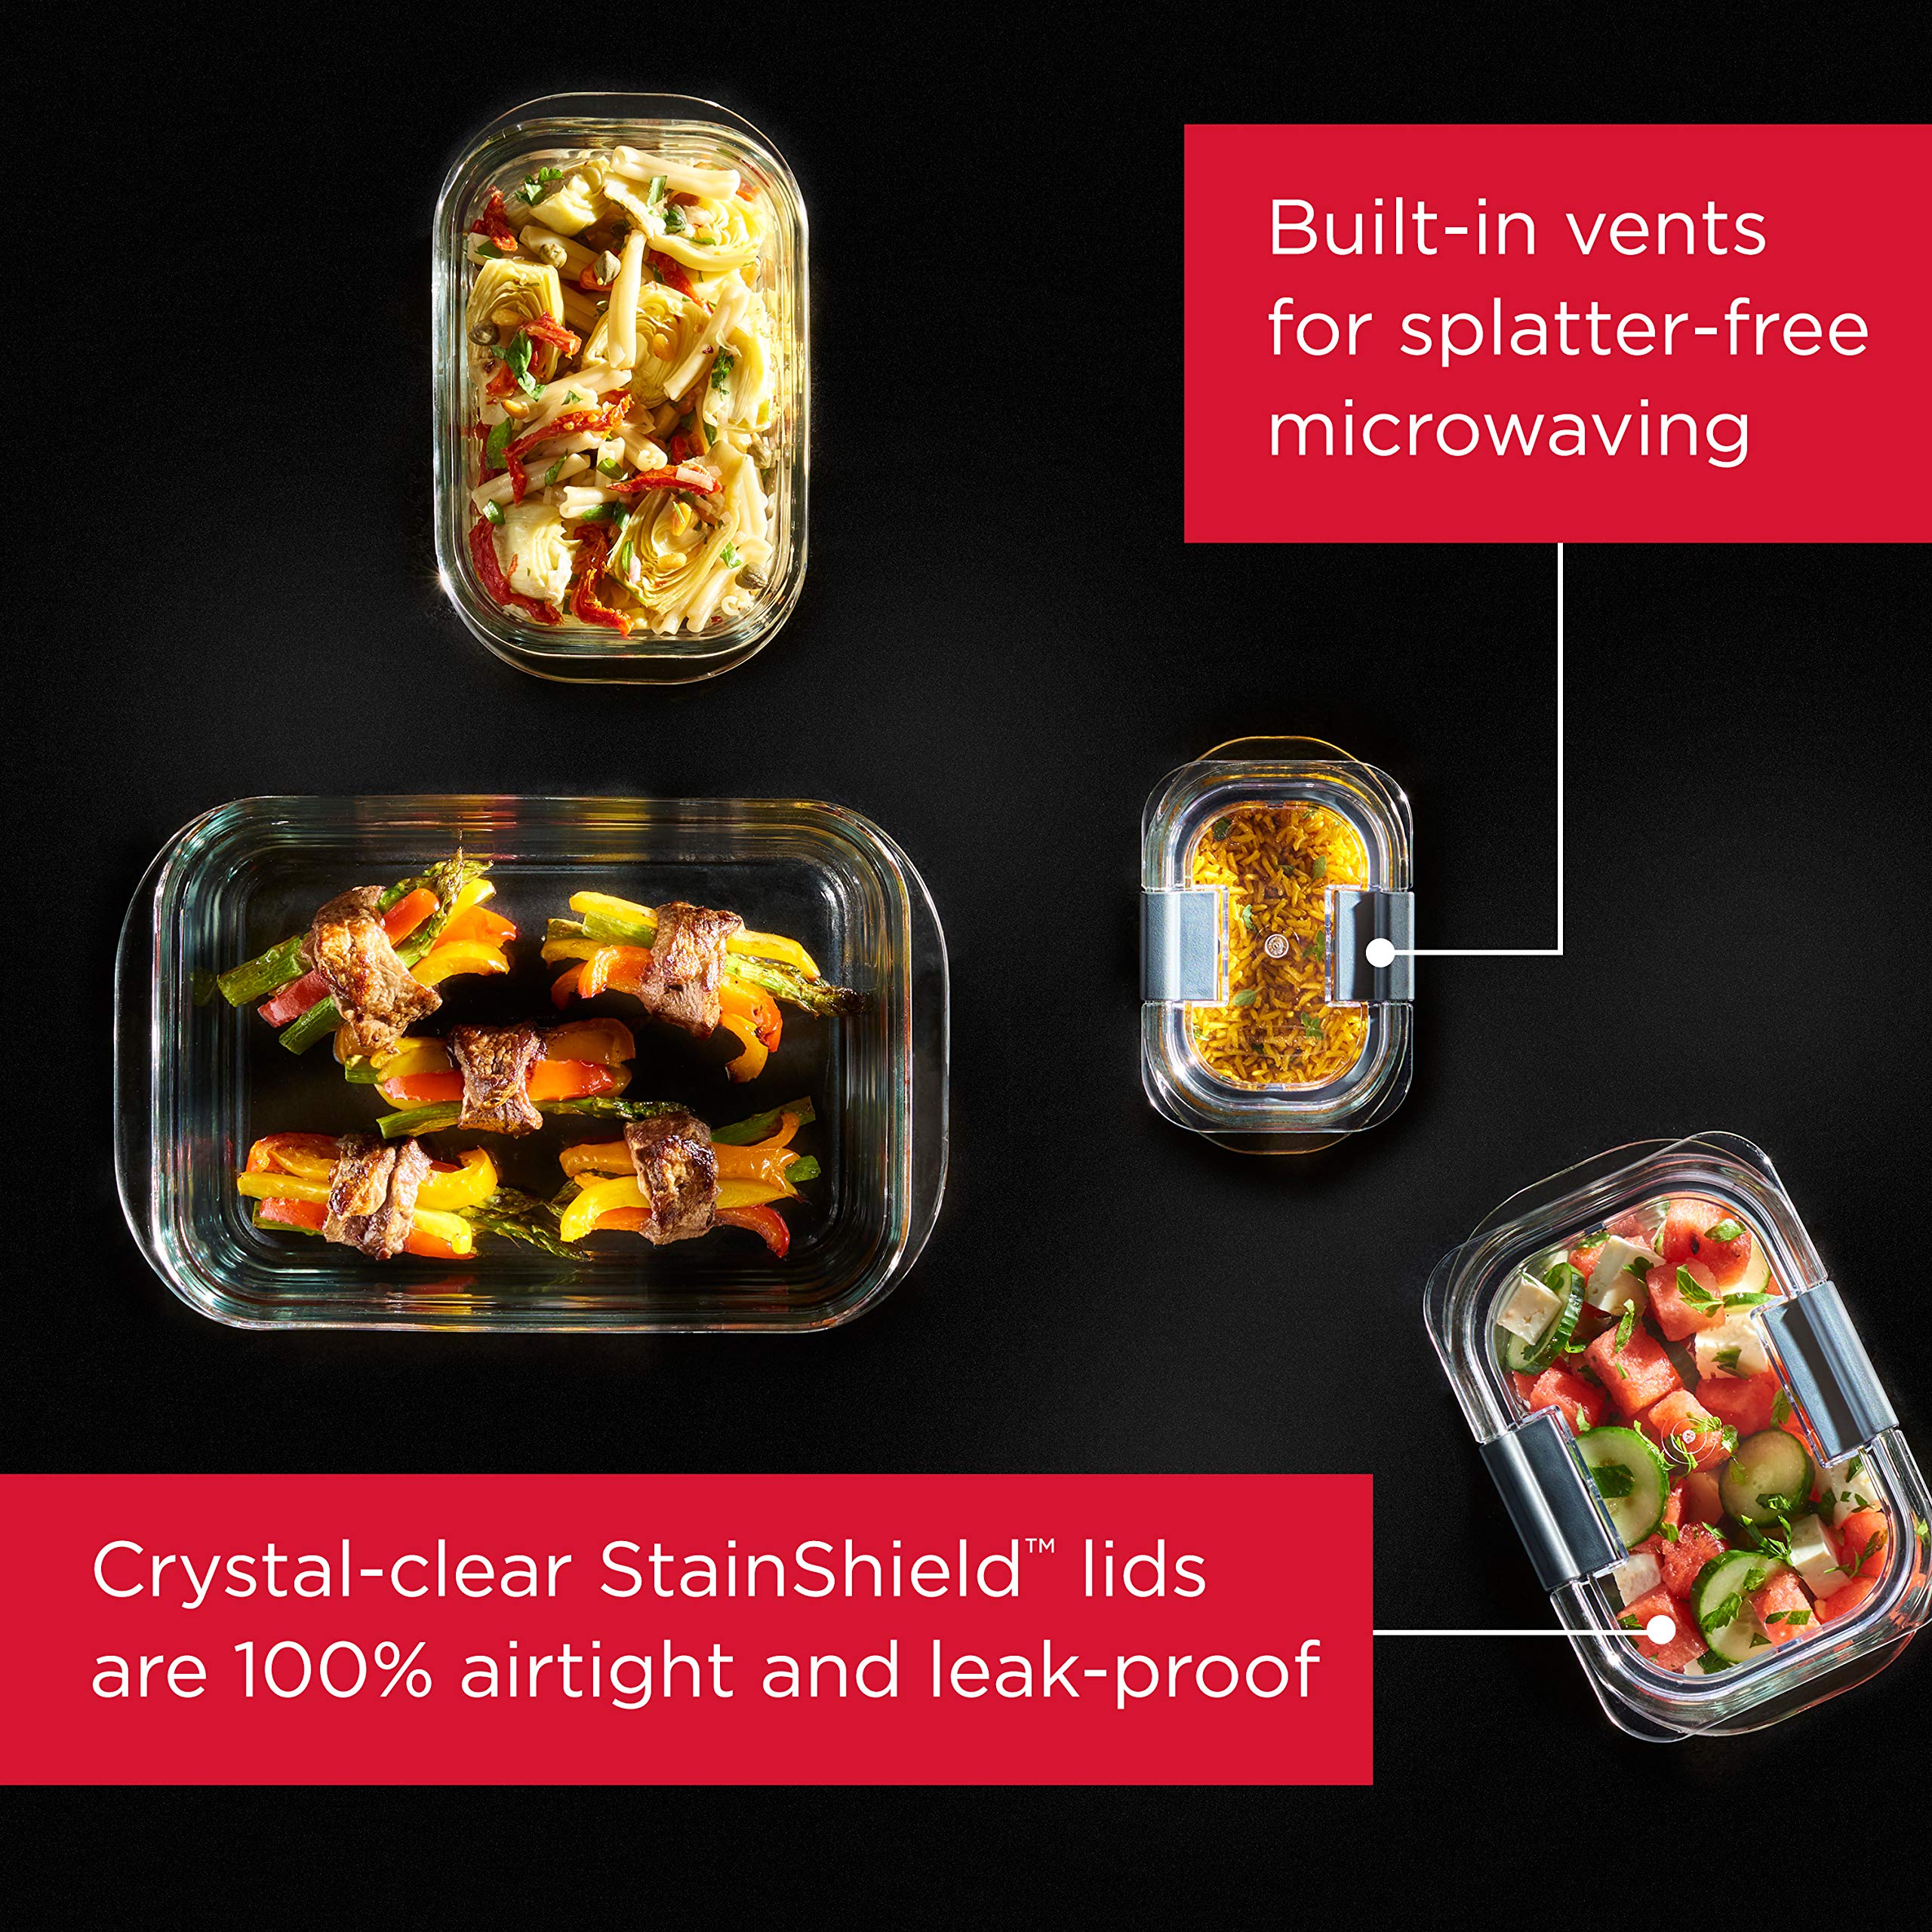 Rubbermaid Brilliance Glass Storage Set of 4 Food Containers, Medium, Clear & Brilliance Glass Storage 4.7-Cup Food Containers with Lids, 3-Pack (6 Pieces Total), Clear